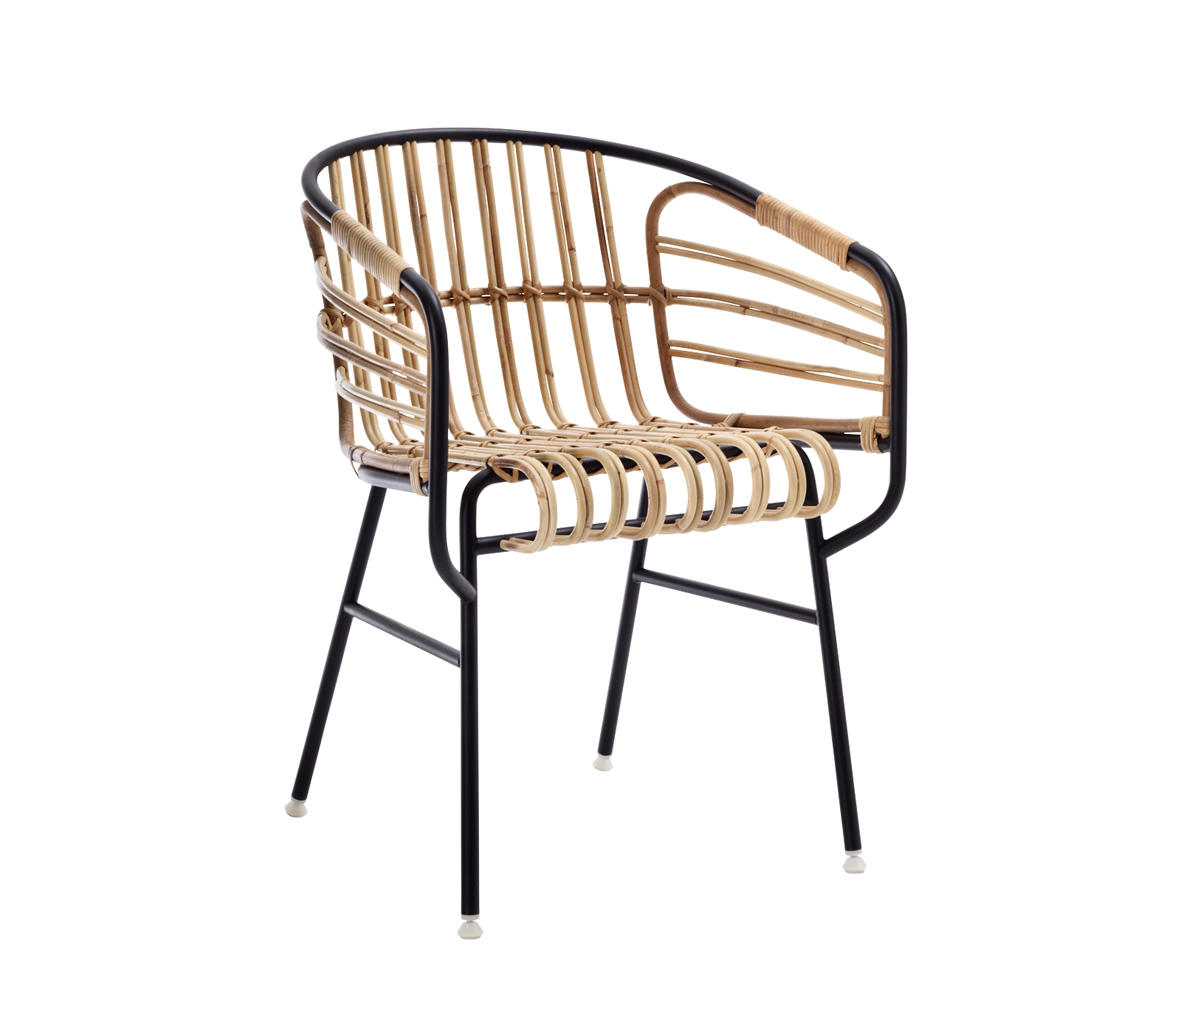 RAPHIA - Chairs from CASAMANIA & HORM | Architonic